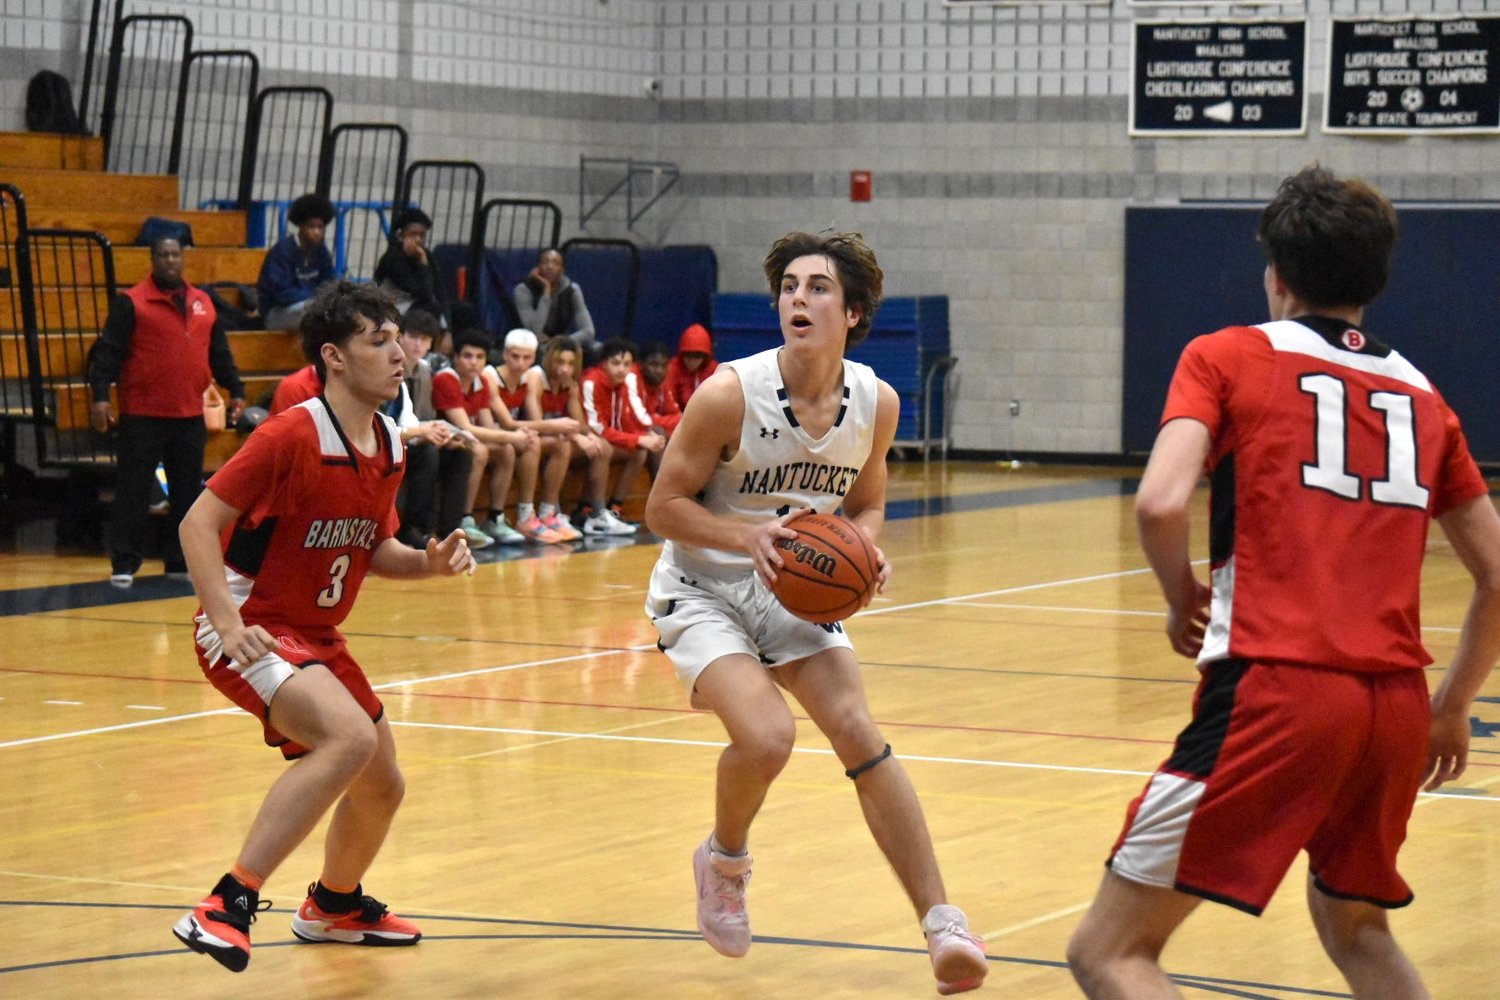 Jack Halik led the Whalers with 20 points in Friday's 62-51 loss at home against Barnstable.